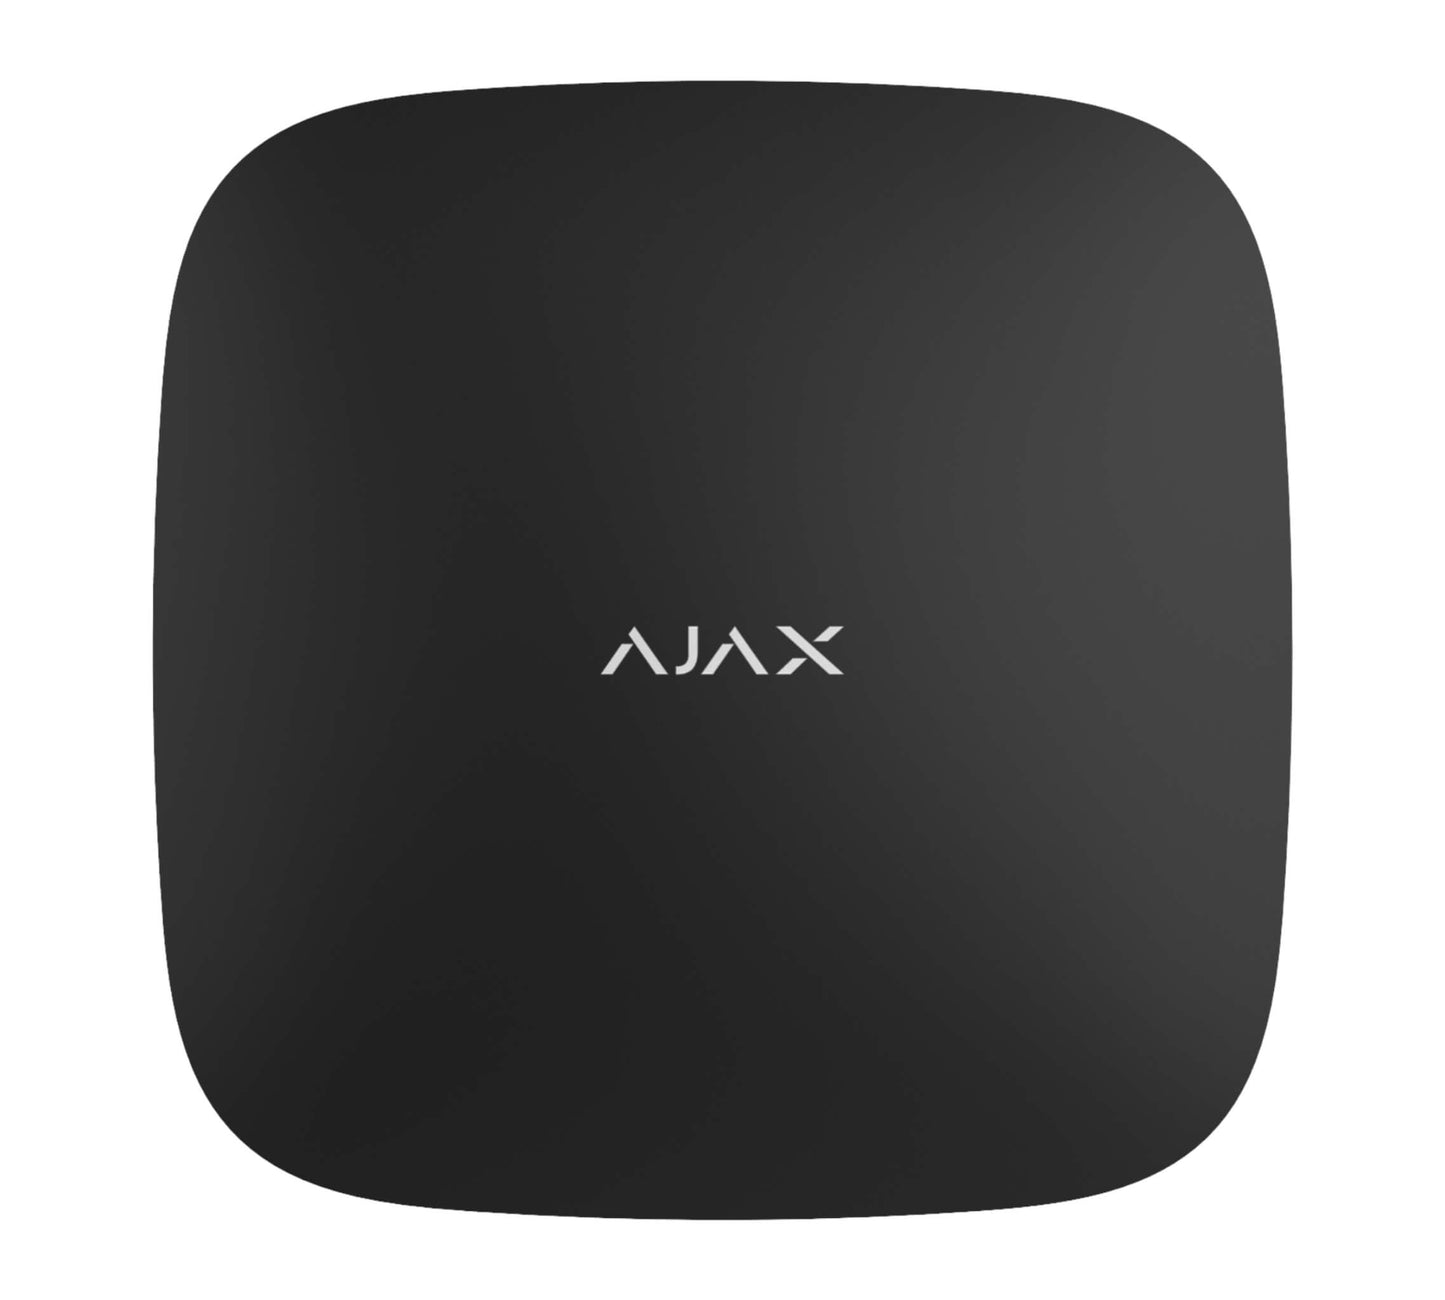 Ajax Security Systems Black ReX Radio range extender for Ajax Systems, for Home and Business security, 163 × 163 × 36 mm in size, 330 grams in weight , rated for Indoor use IP50, Front view of Device.